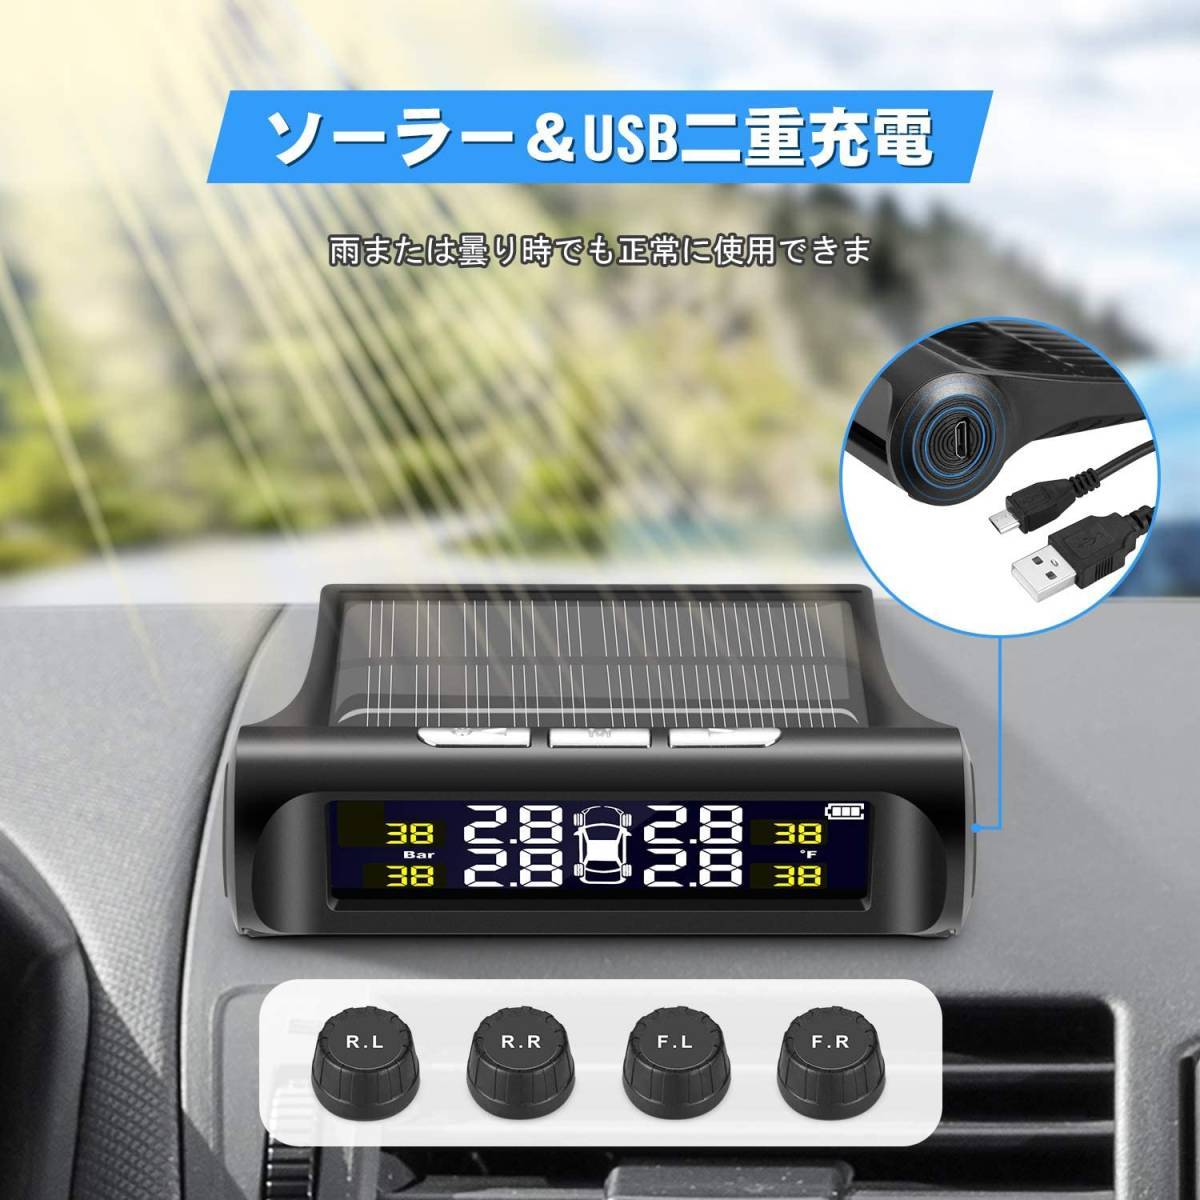 1 jpy from free shipping tire empty atmospheric pressure sensor tire empty atmospheric pressure monitor TPMS atmospheric pressure temperature immediately hour monitoring sun talent USB two -ply charge wireless external sensor oscillation perception 